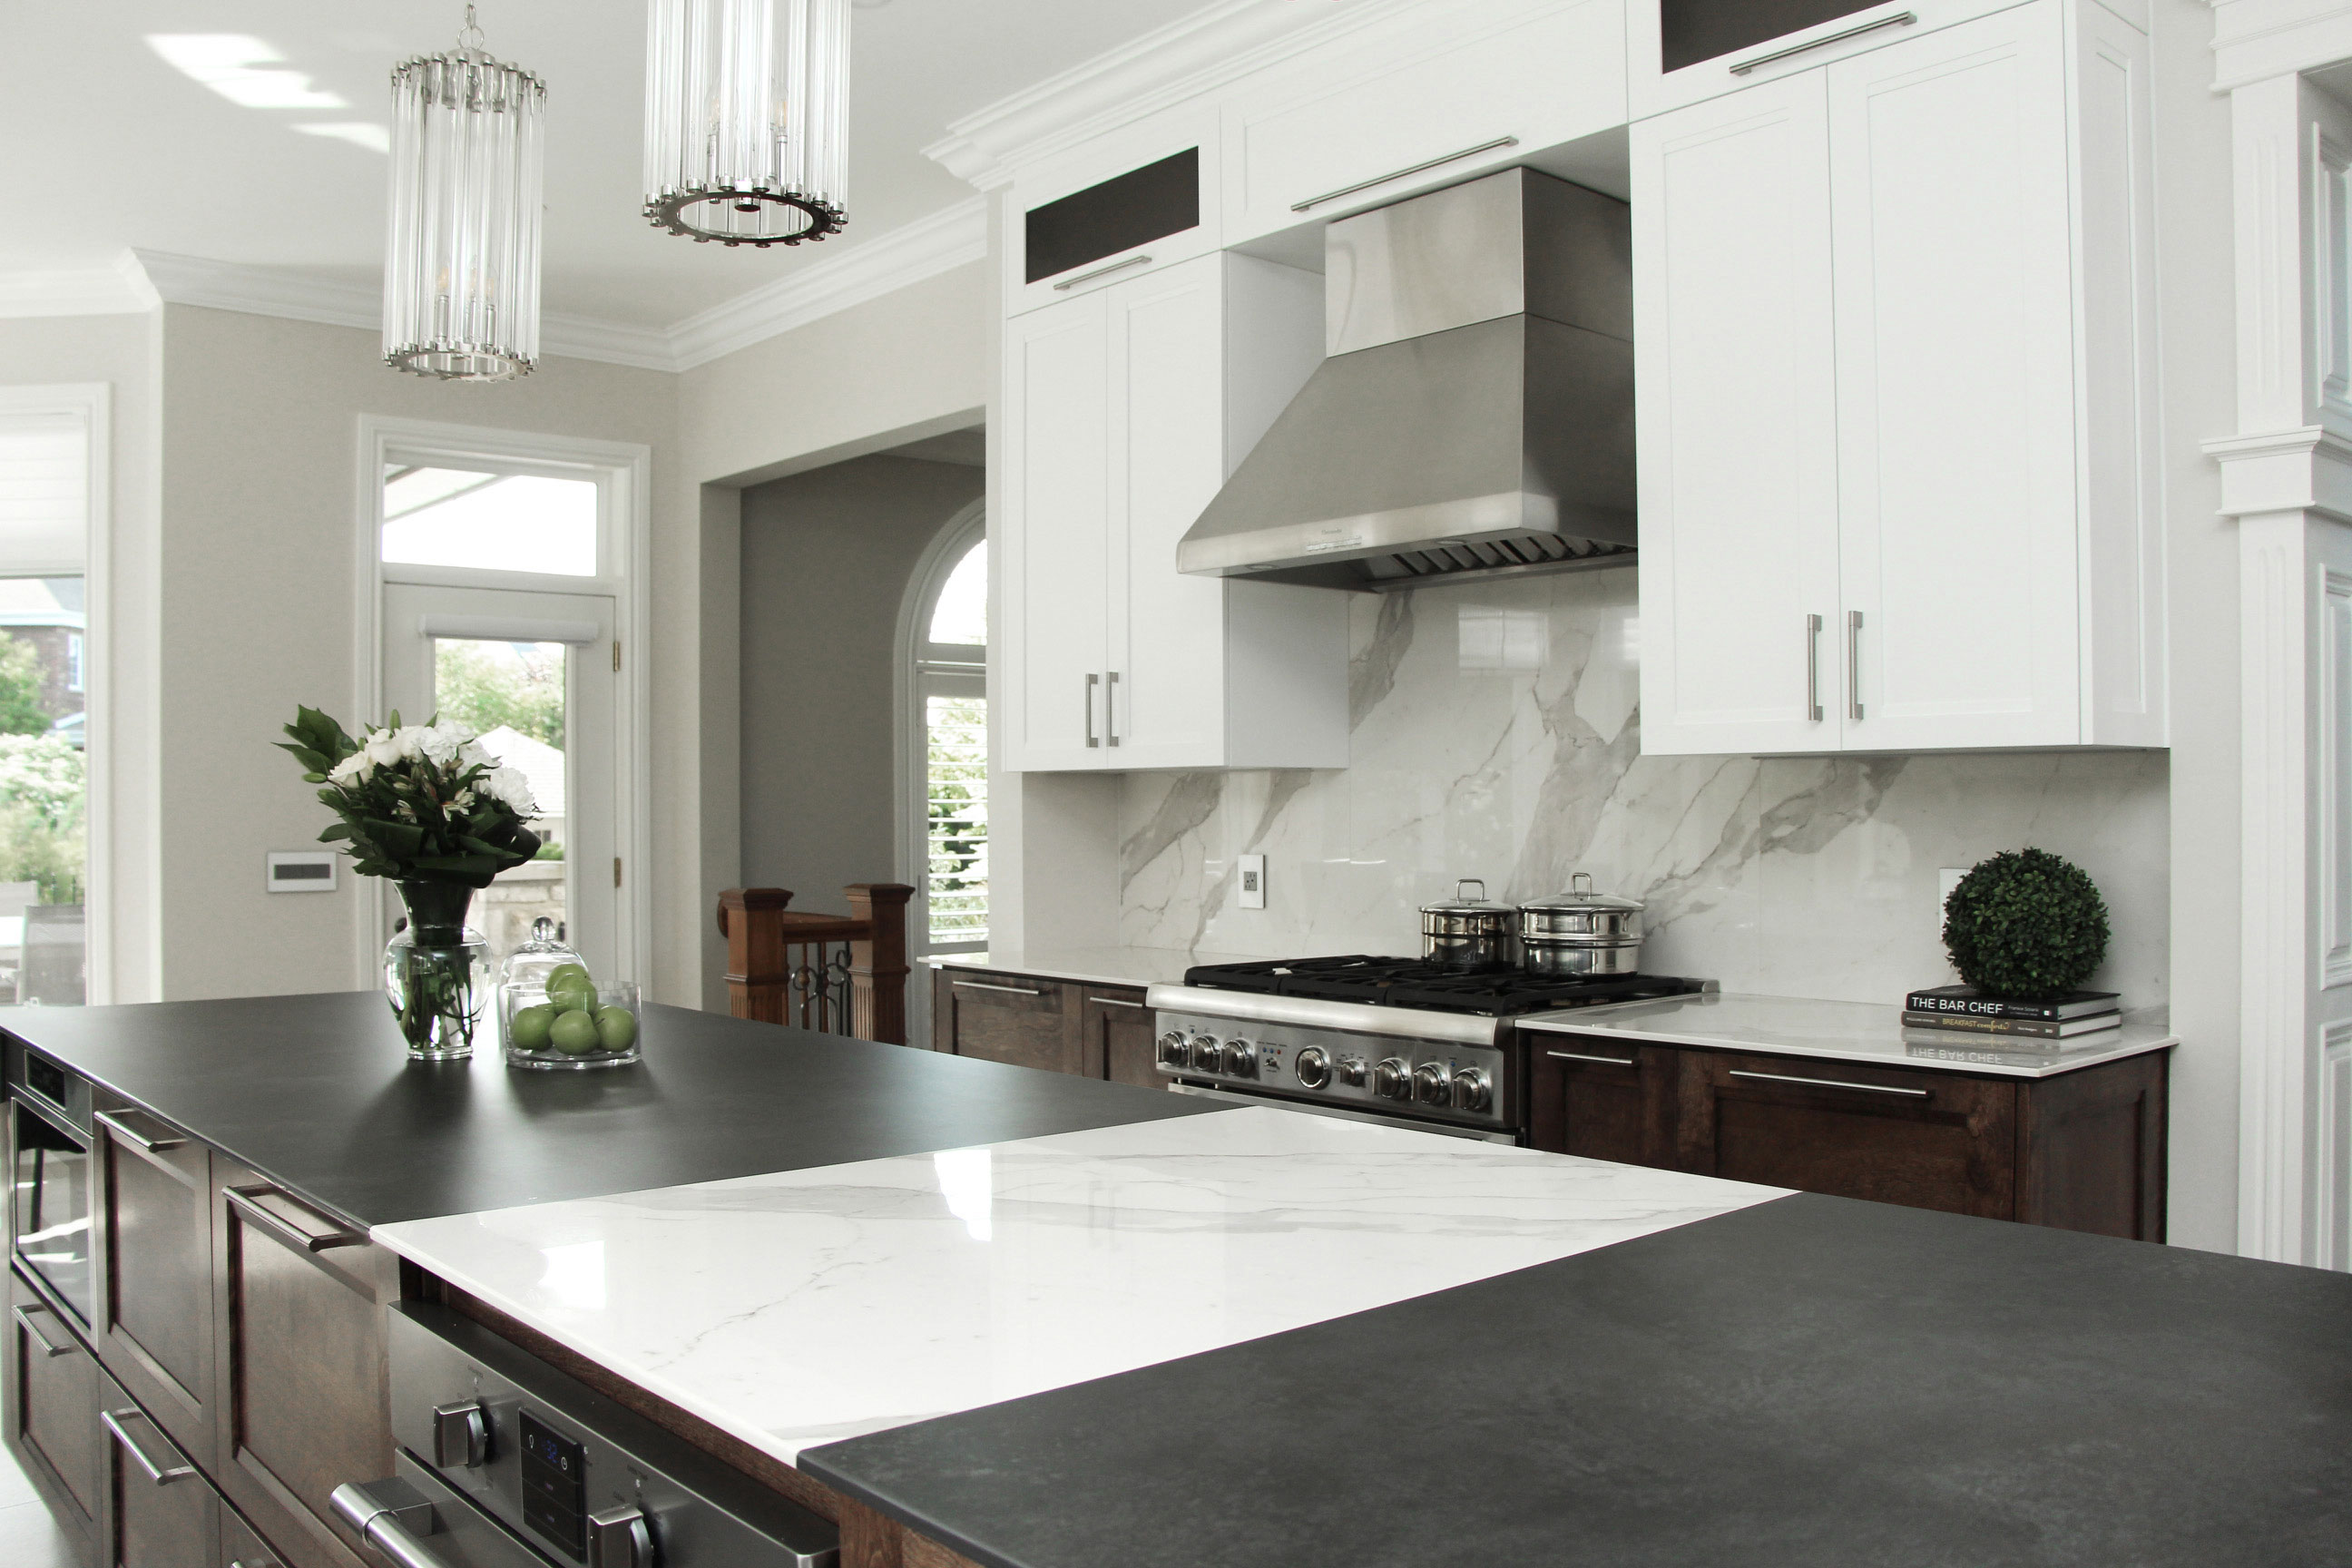 Stone Slab Countertops | The 5 Best Types of Countertops